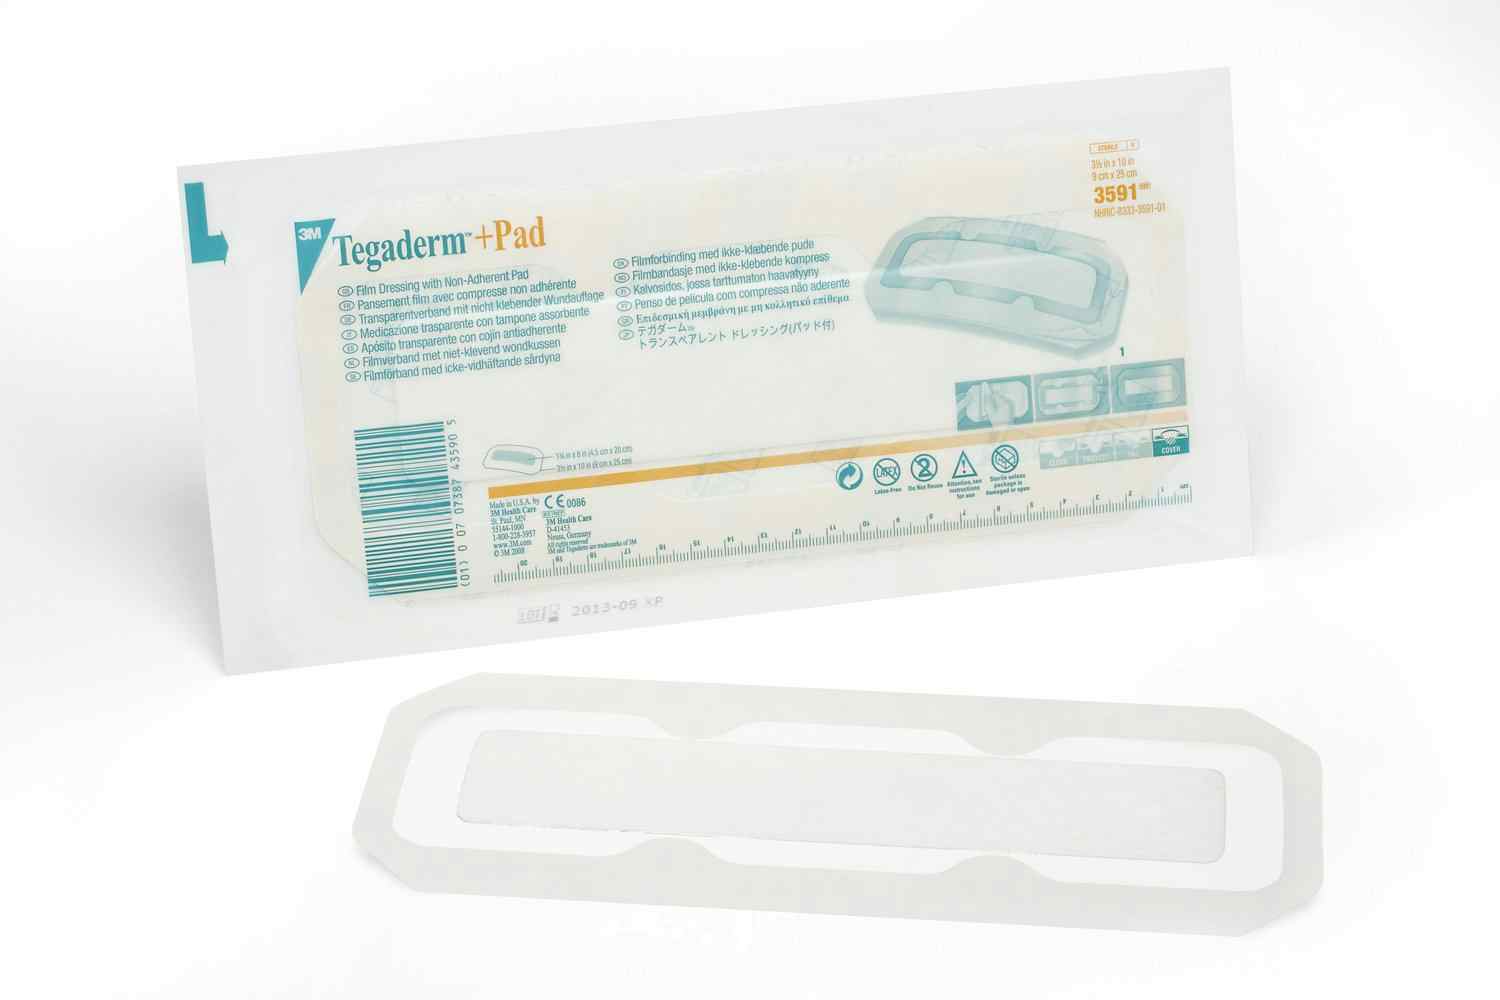 3M Tegaderm +Pad Film Dressing with Non-Adherent Pads, 3.5 X 10"